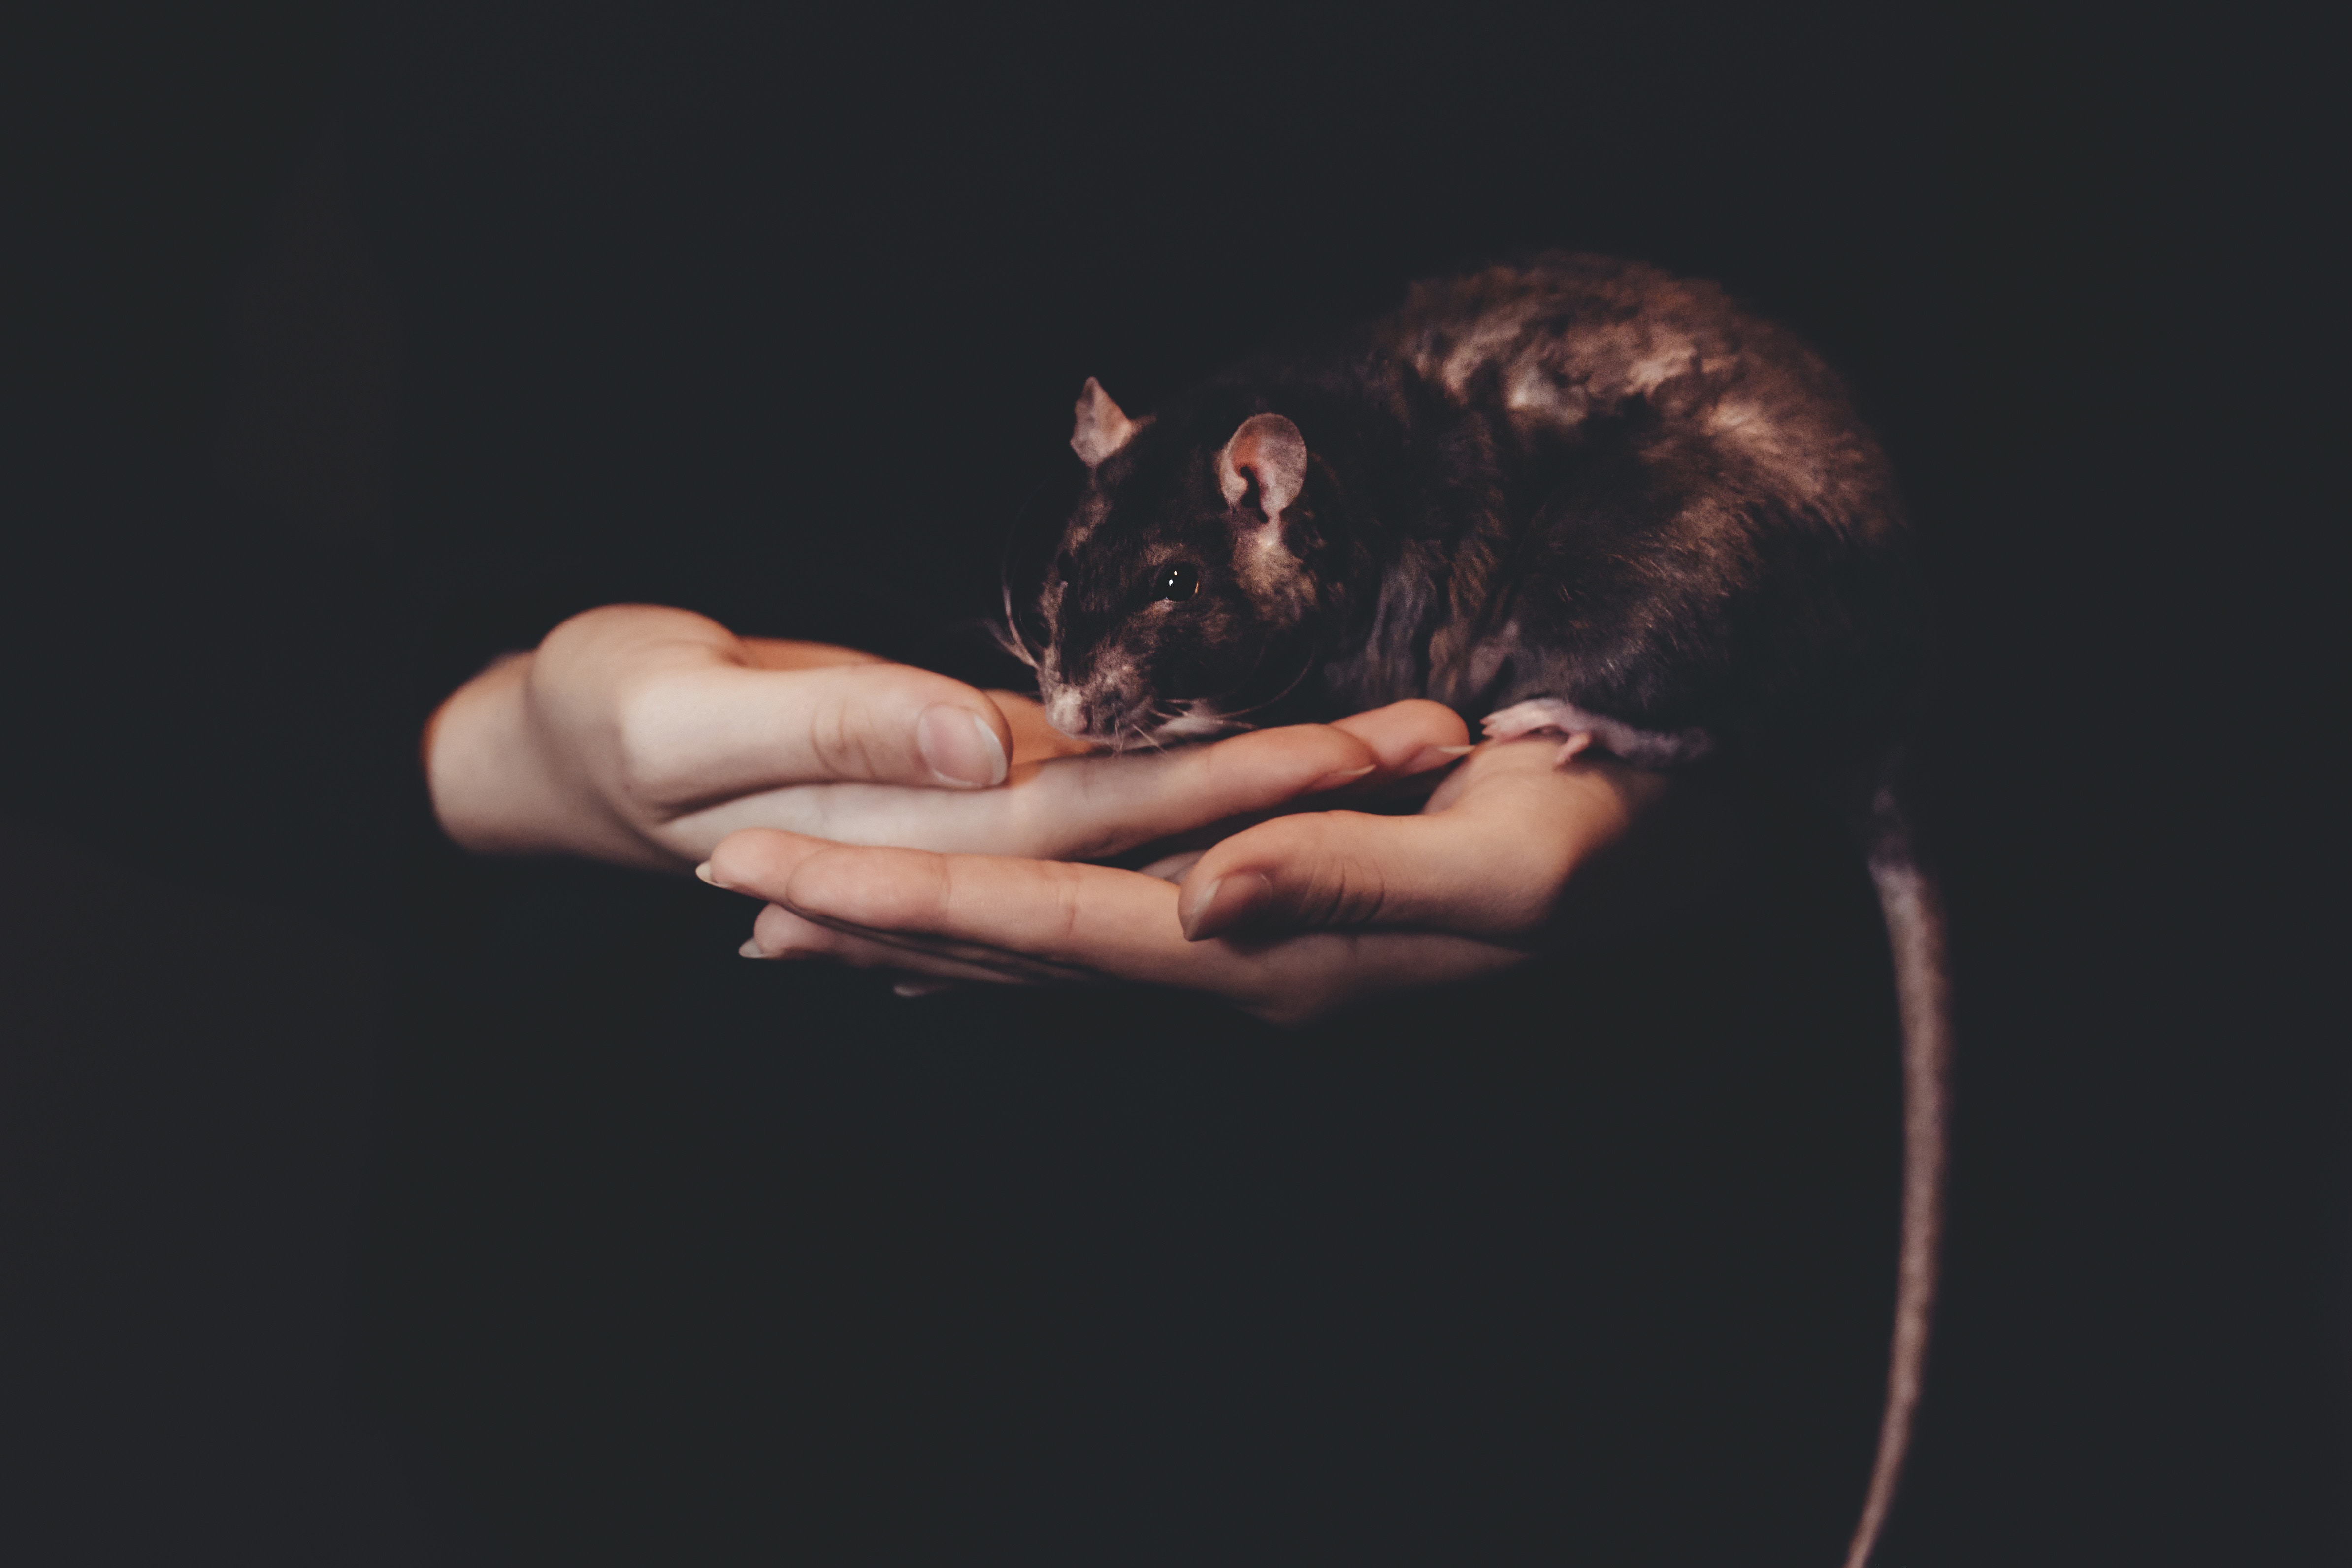 a person's hands holding large black rat